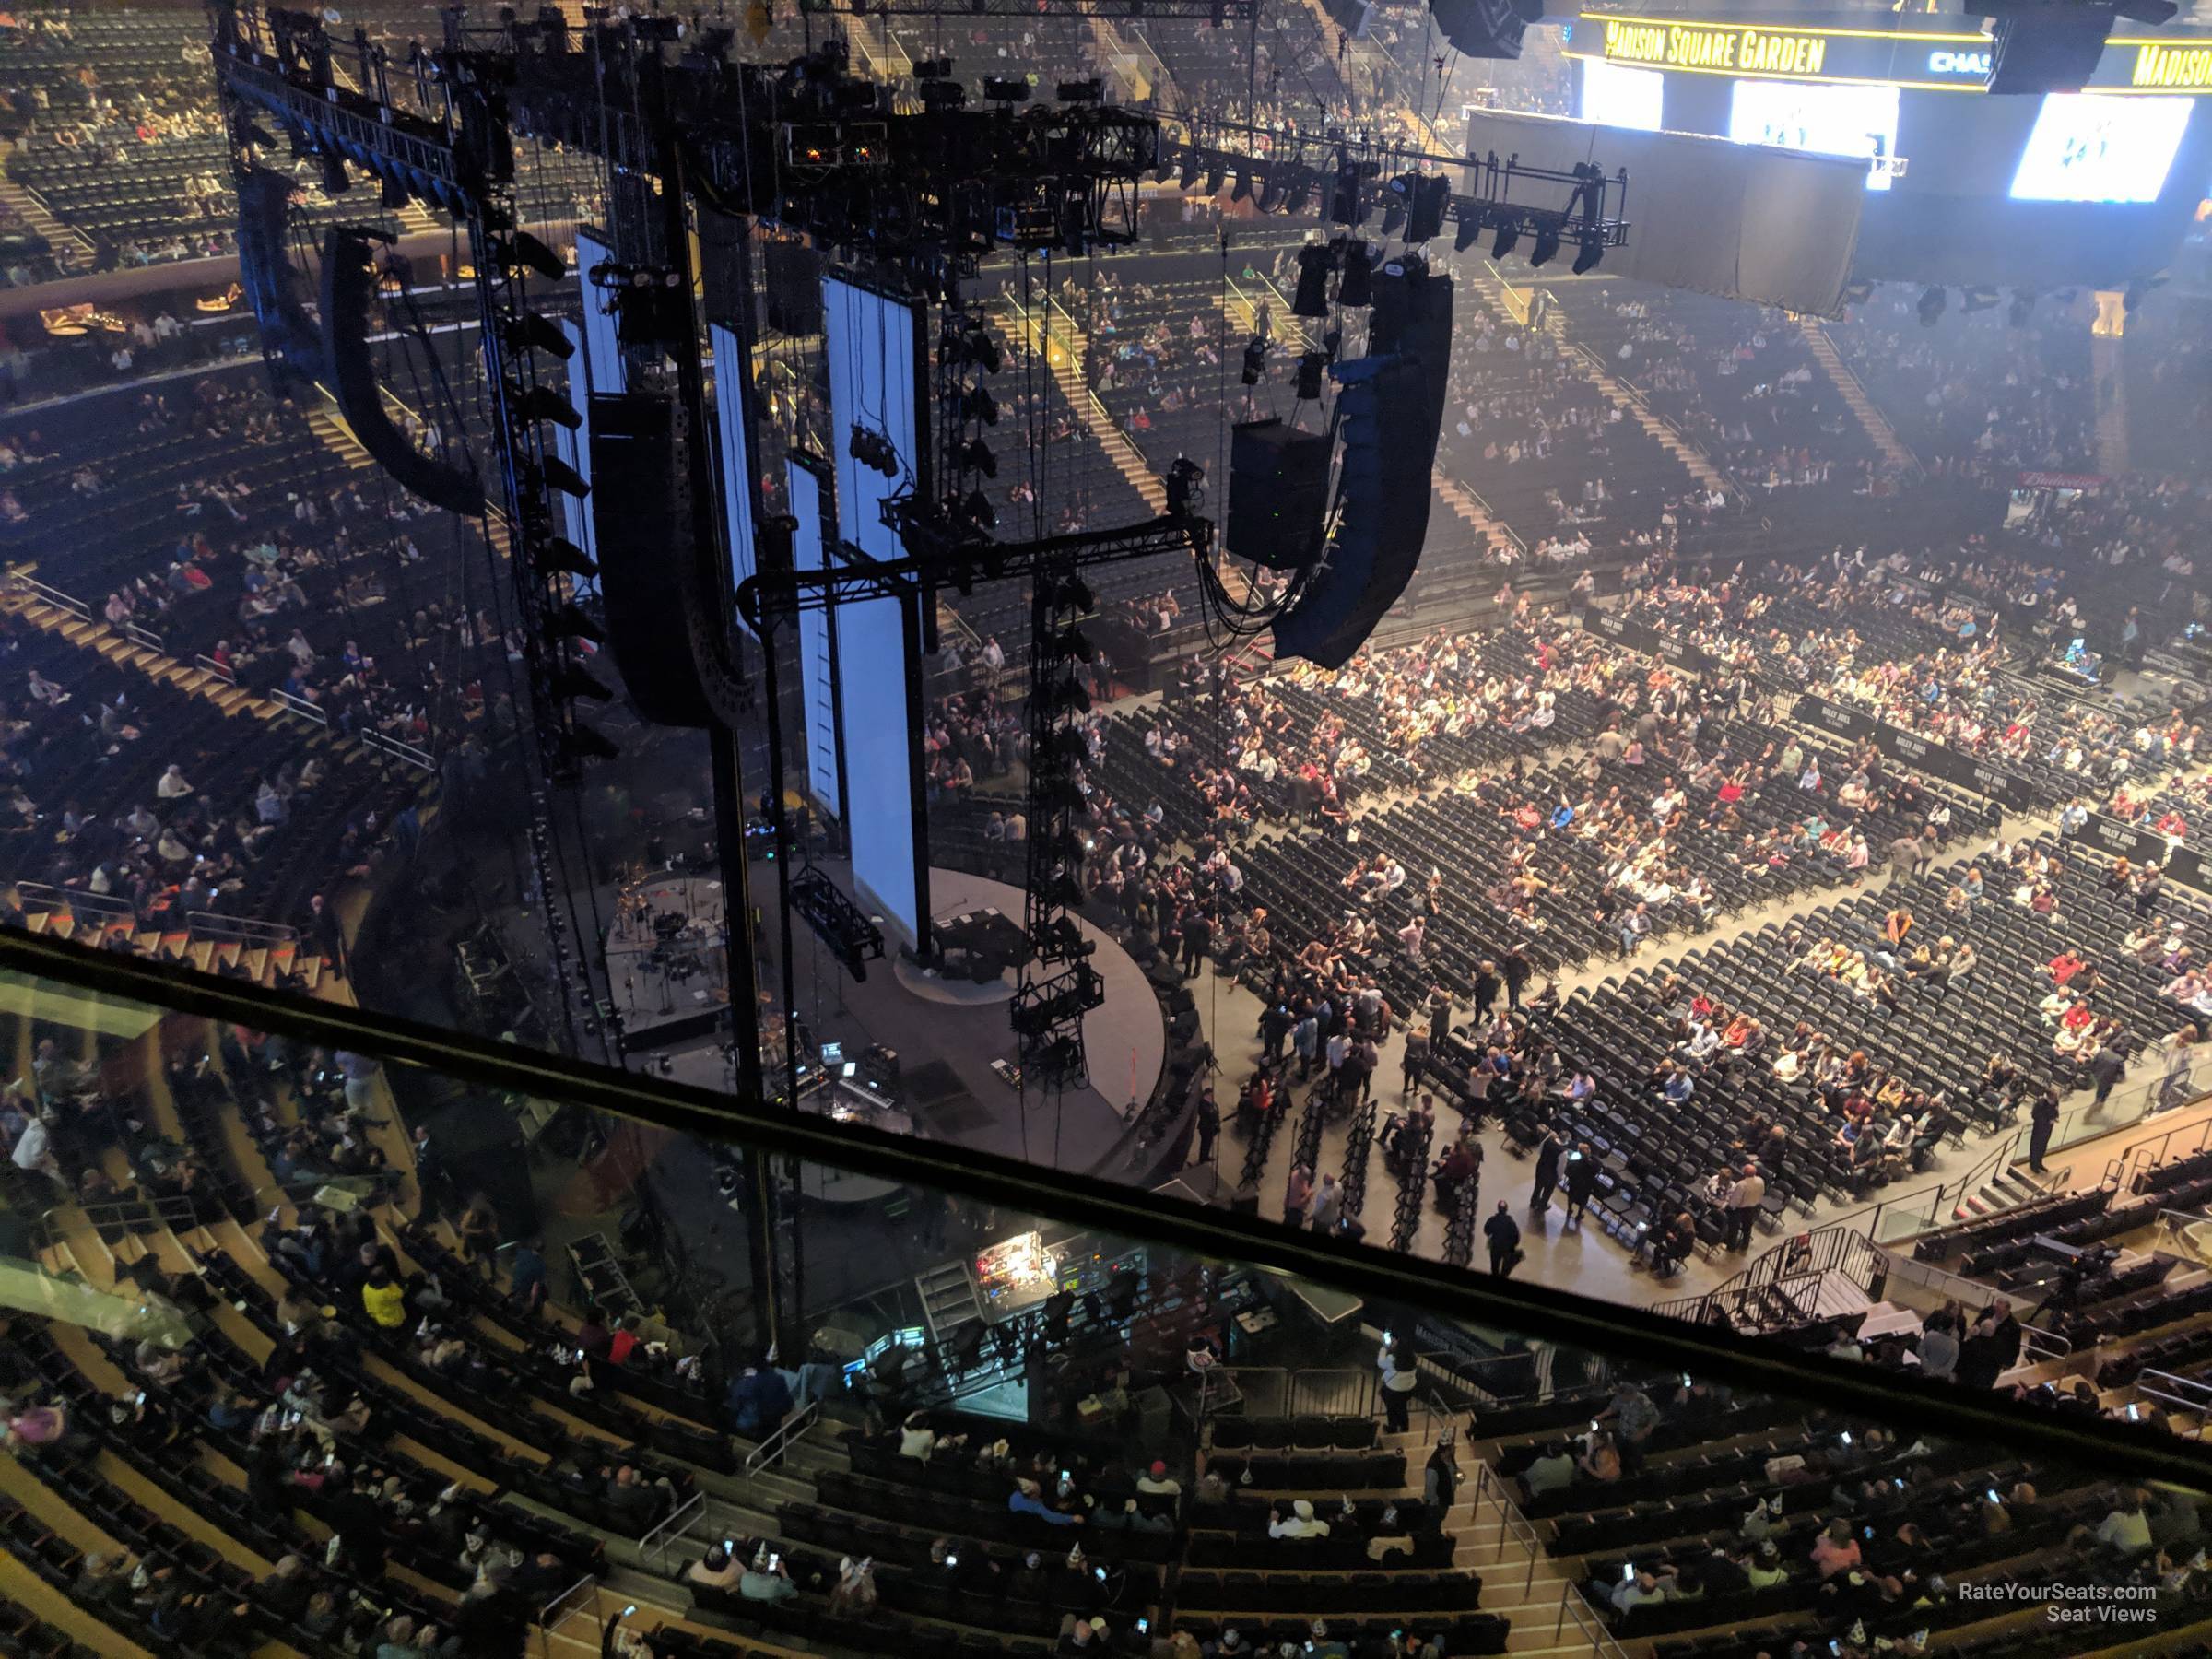 section 323, row 2 seat view  for concert - madison square garden